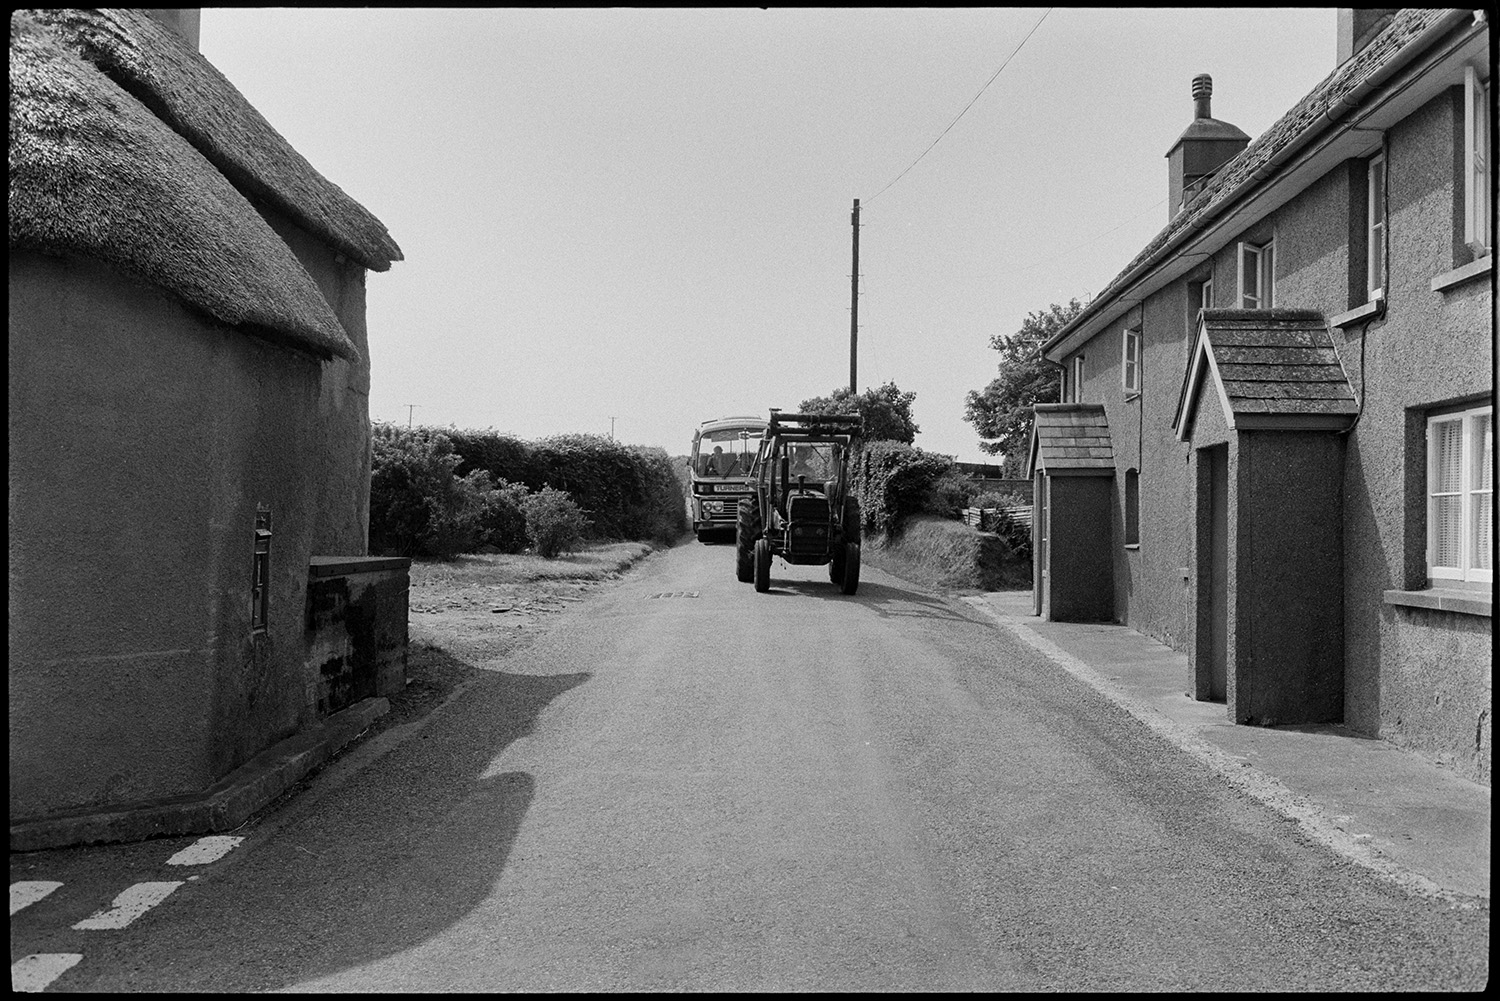 Road and houses, comparison with old photo.
[Tractor and a Turners coach driving past Moor End, Burrington, passing a thatched house with a post box set into the wall of the house.]